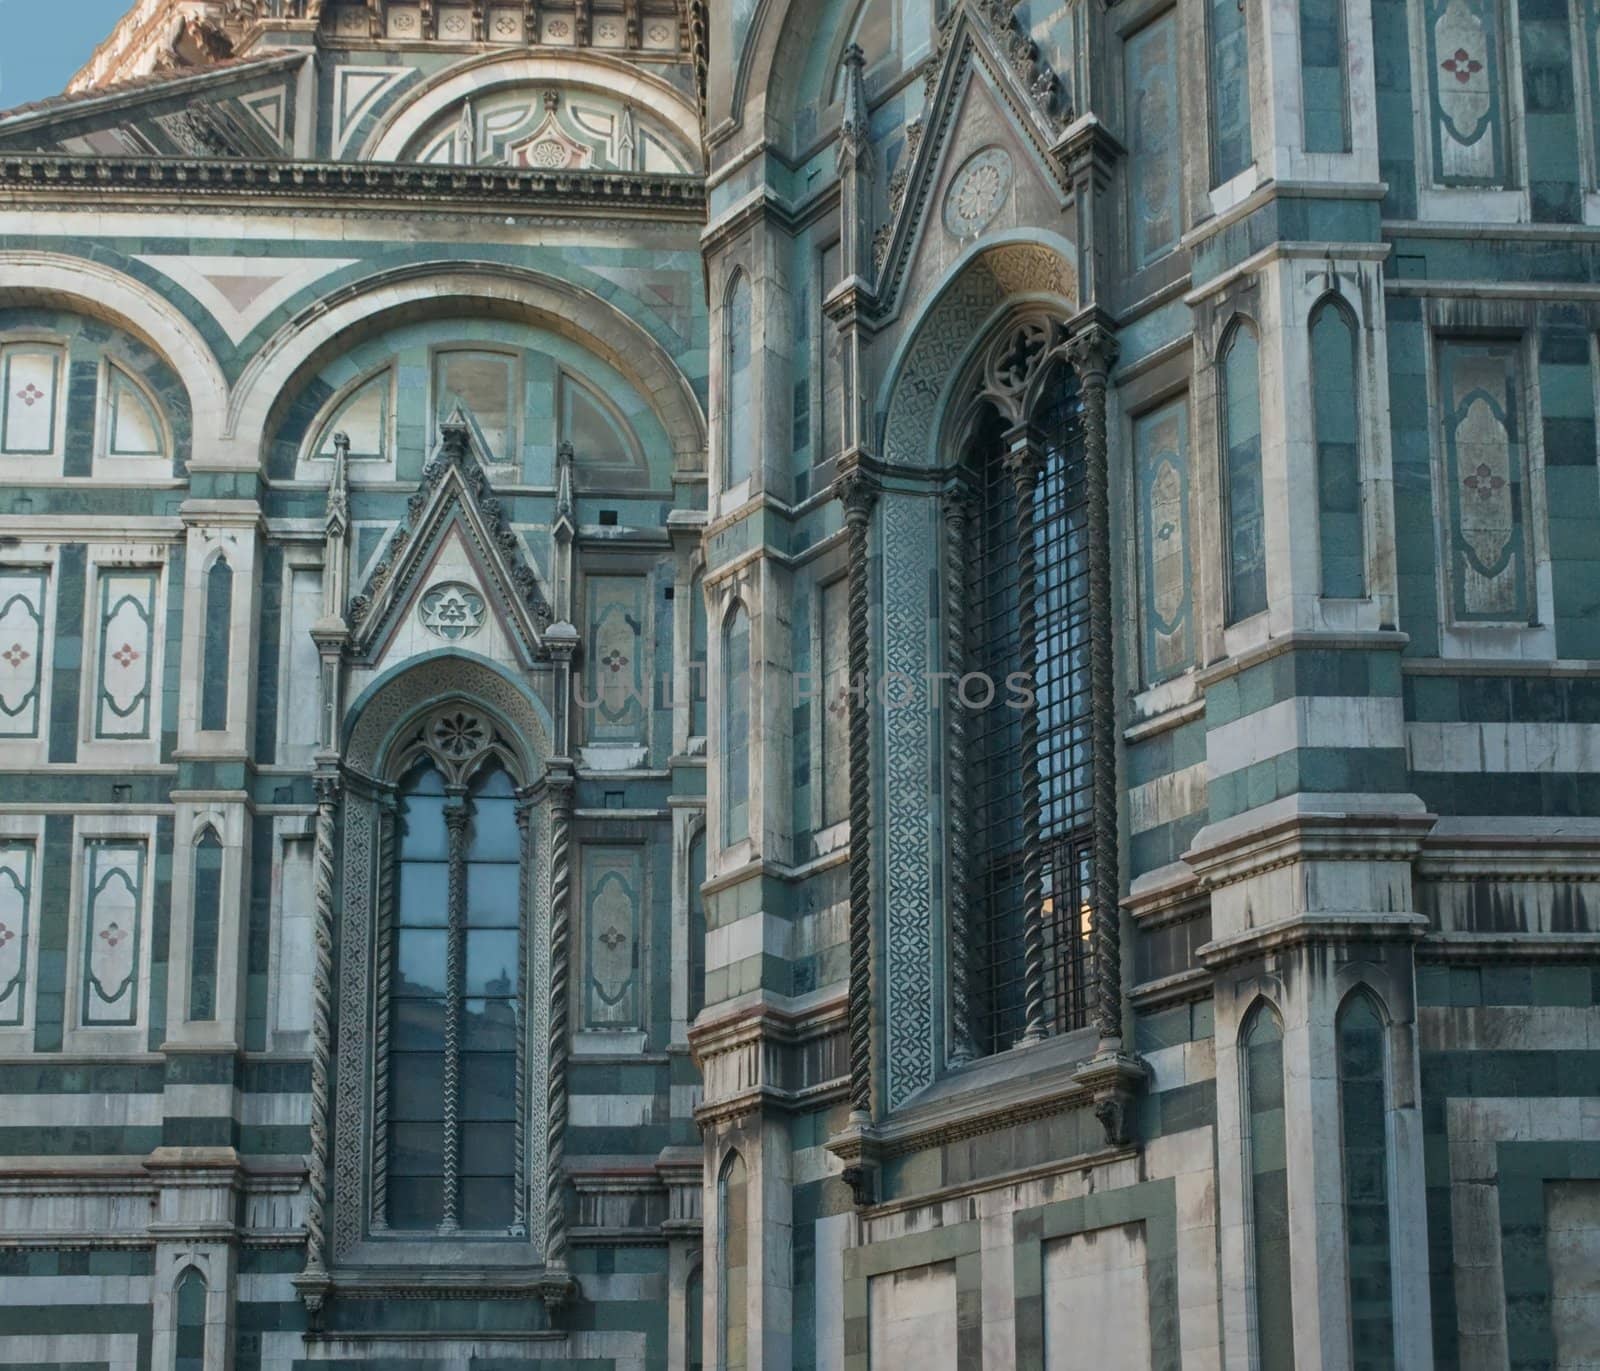 Decor of Duomo Cathedral in Florence